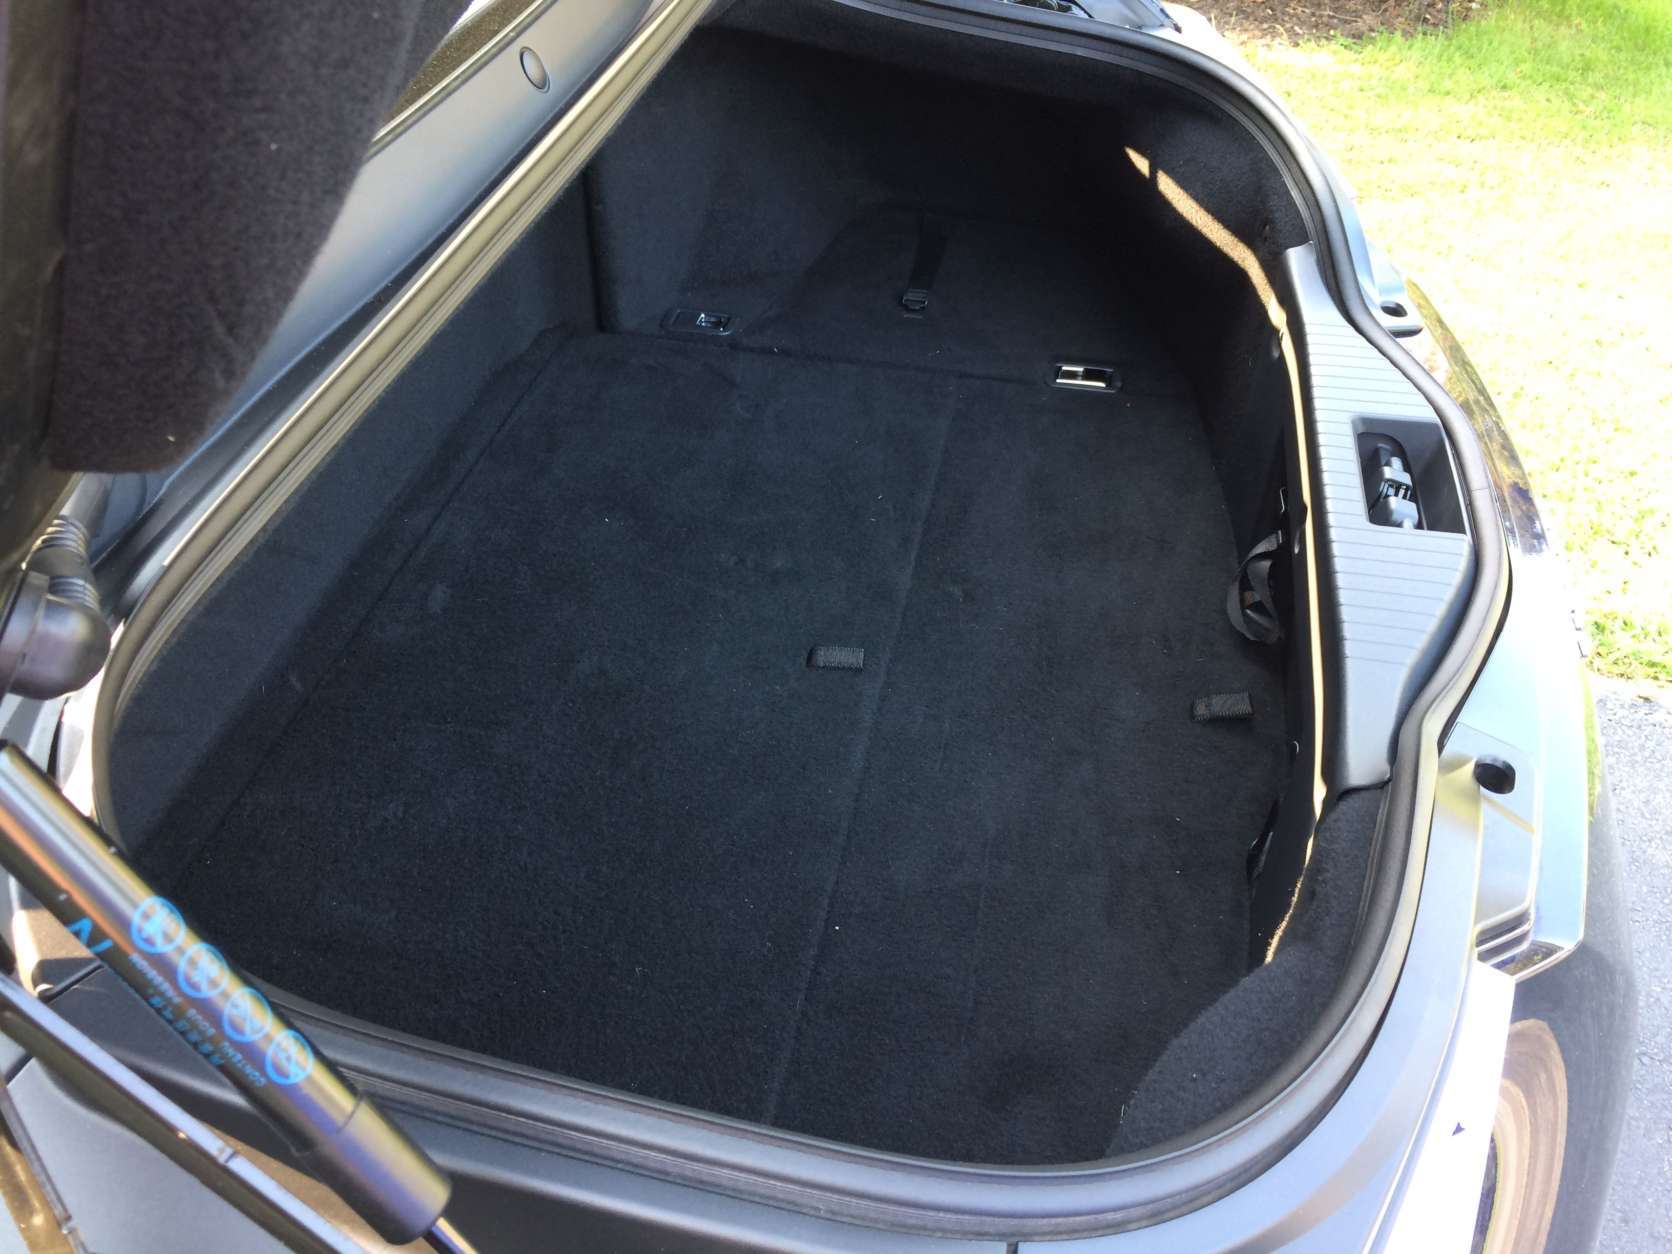 The trunk isn’t large but it's usable; it looks like a golf bag might just fit in there. (WTOP/Mike Parris) 